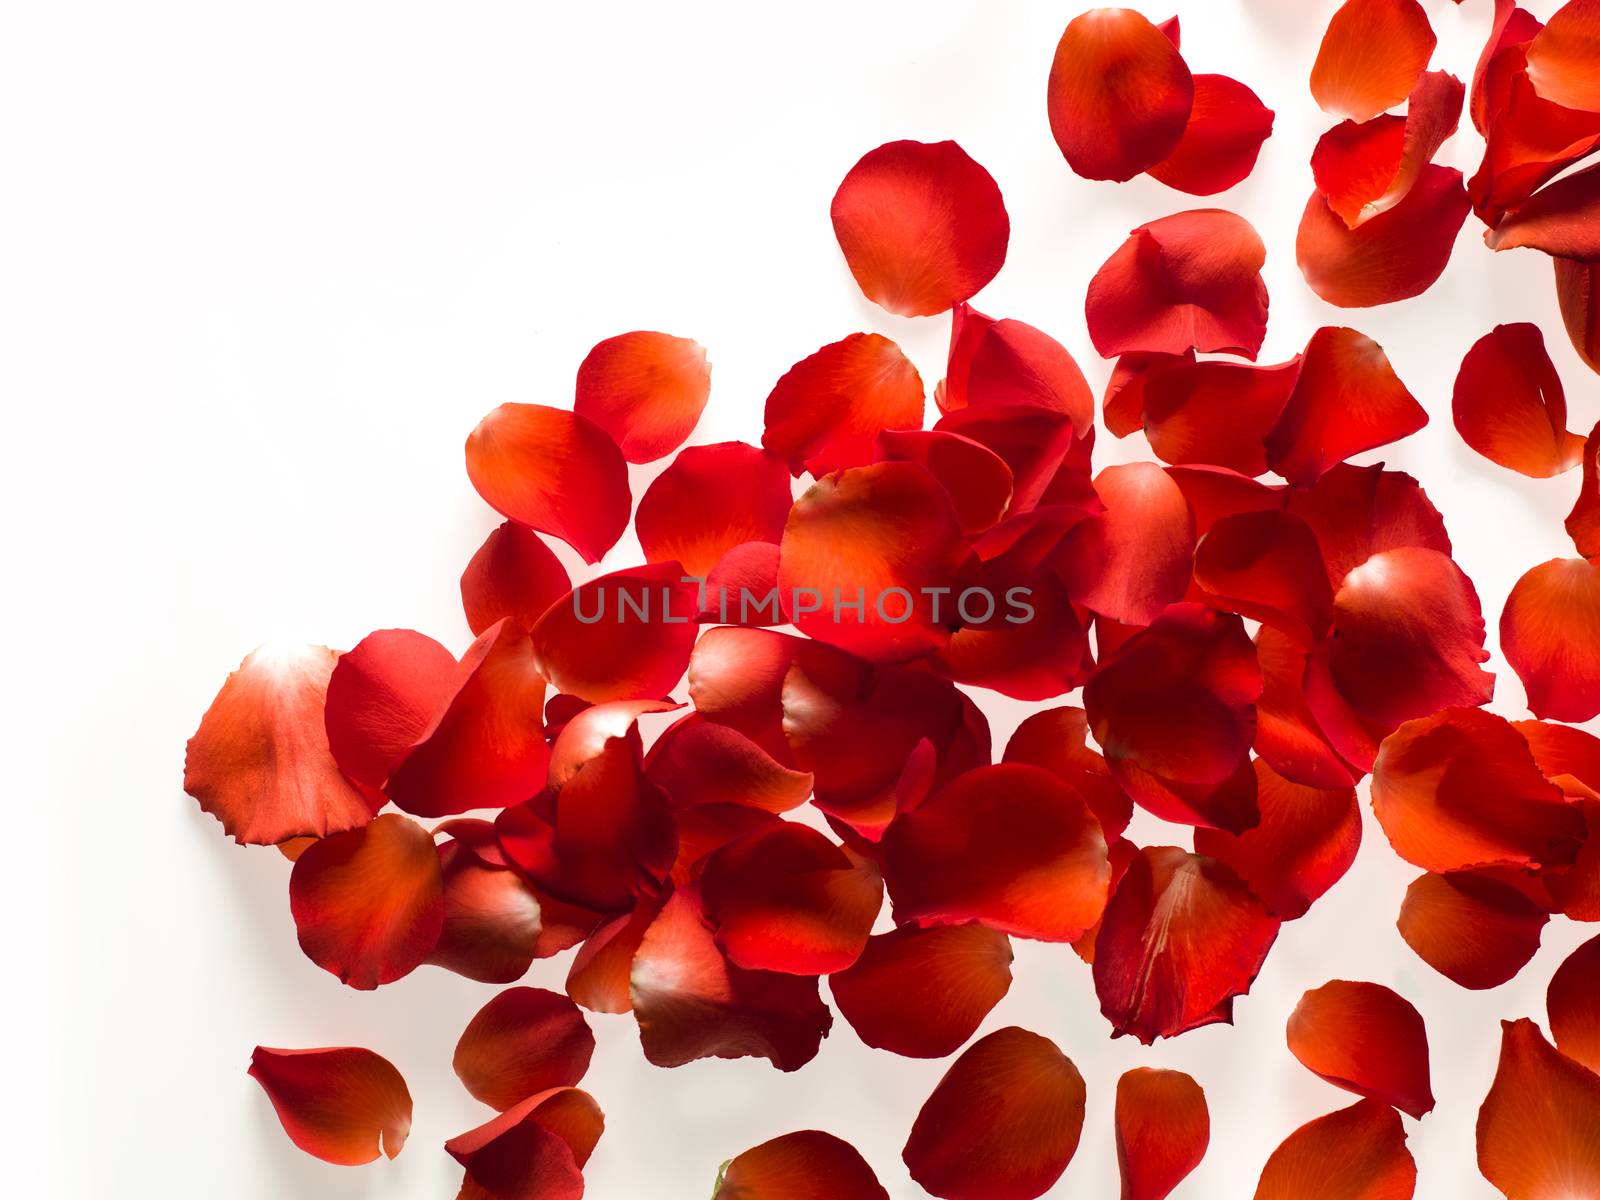 Rose petals against a white background. For presentations, forms by janssenkruseproductions